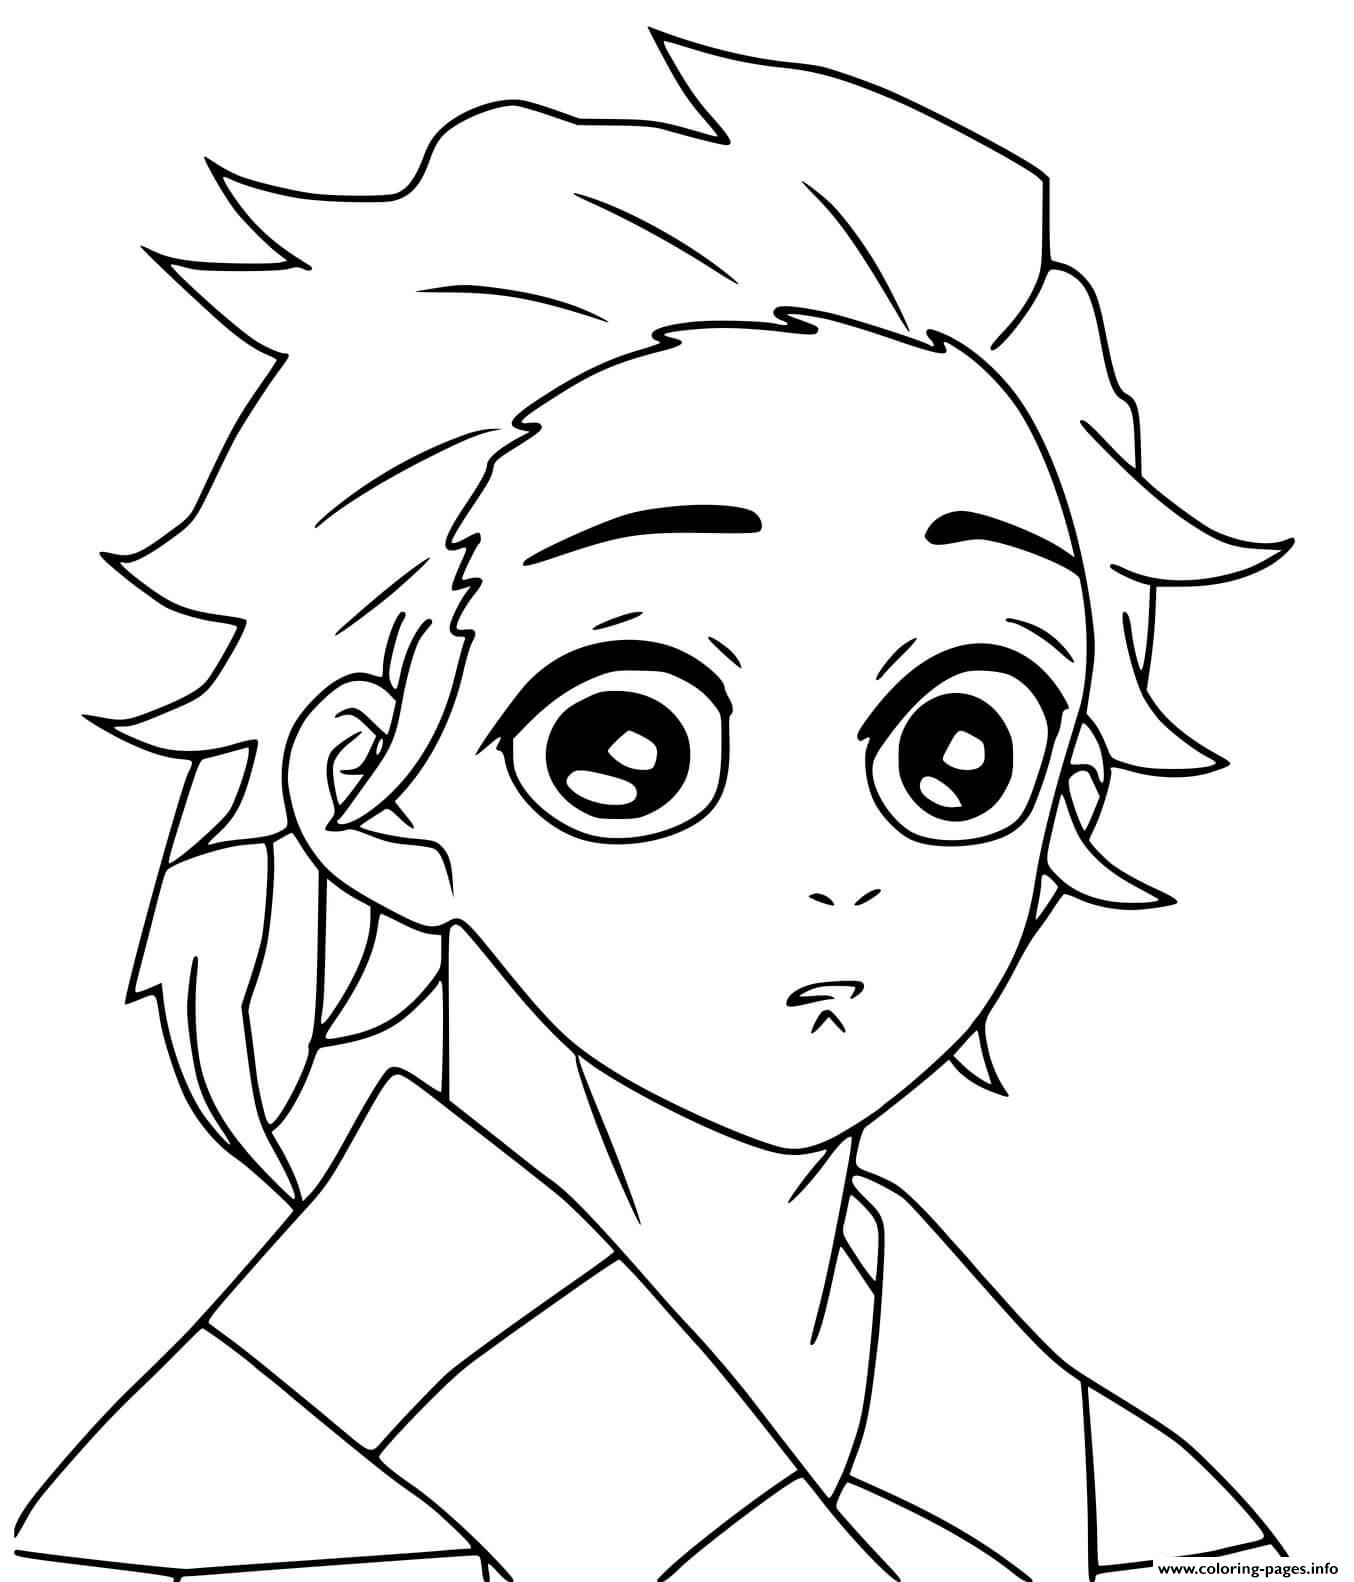 Tanjiro Kamado Demon Slayer Coloring Page Anime Coloring Pages Porn Porn Sex Picture